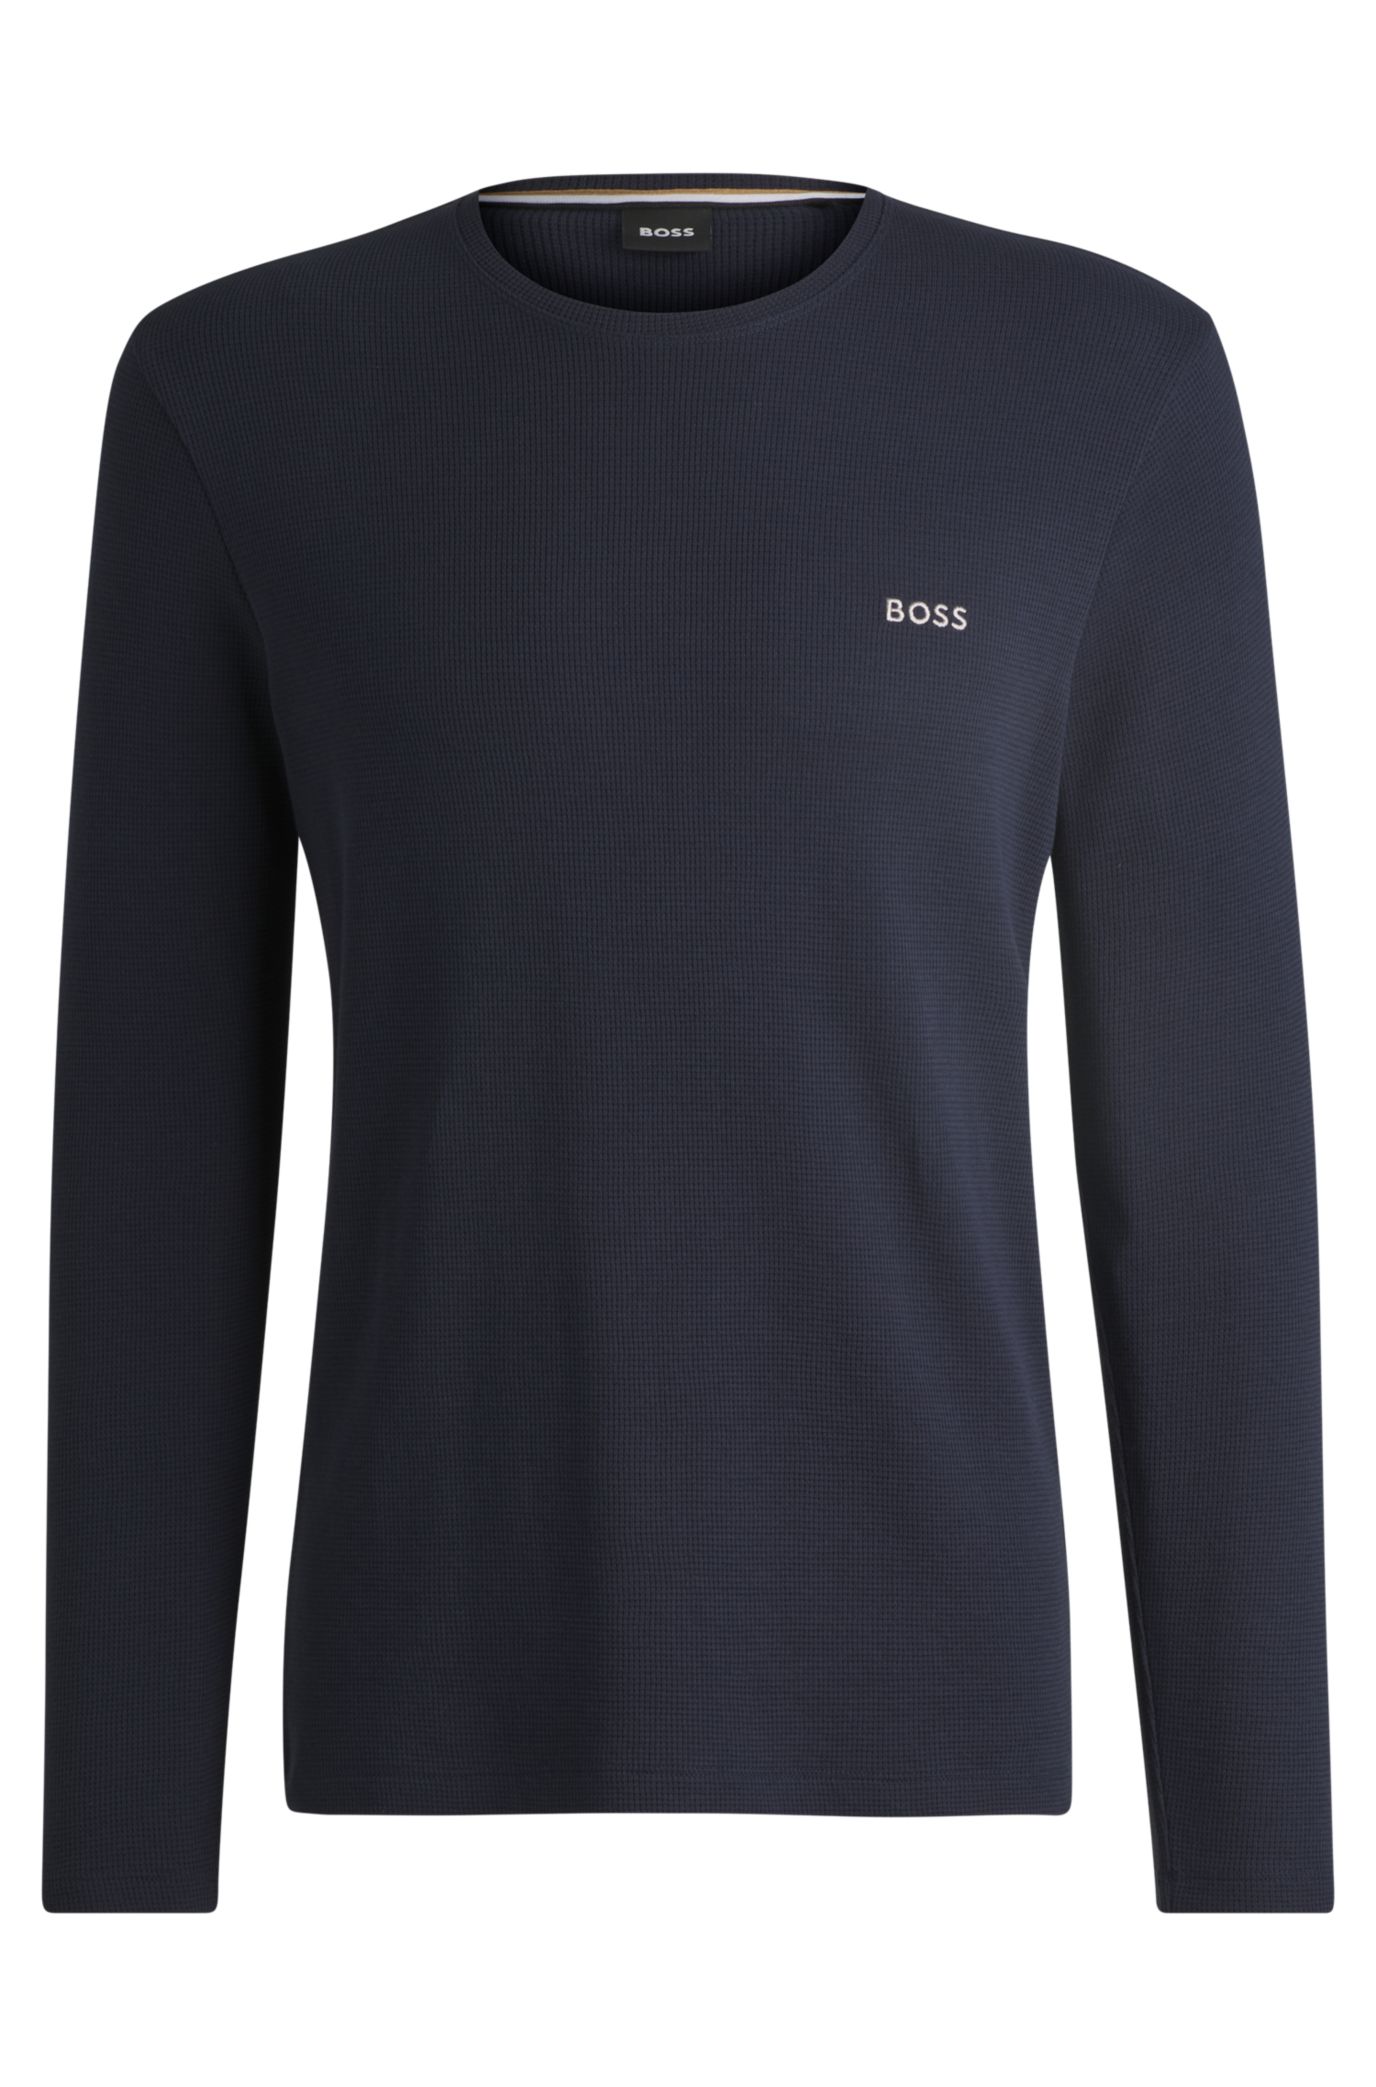 BOSS - logo with pajama T-shirt embroidered